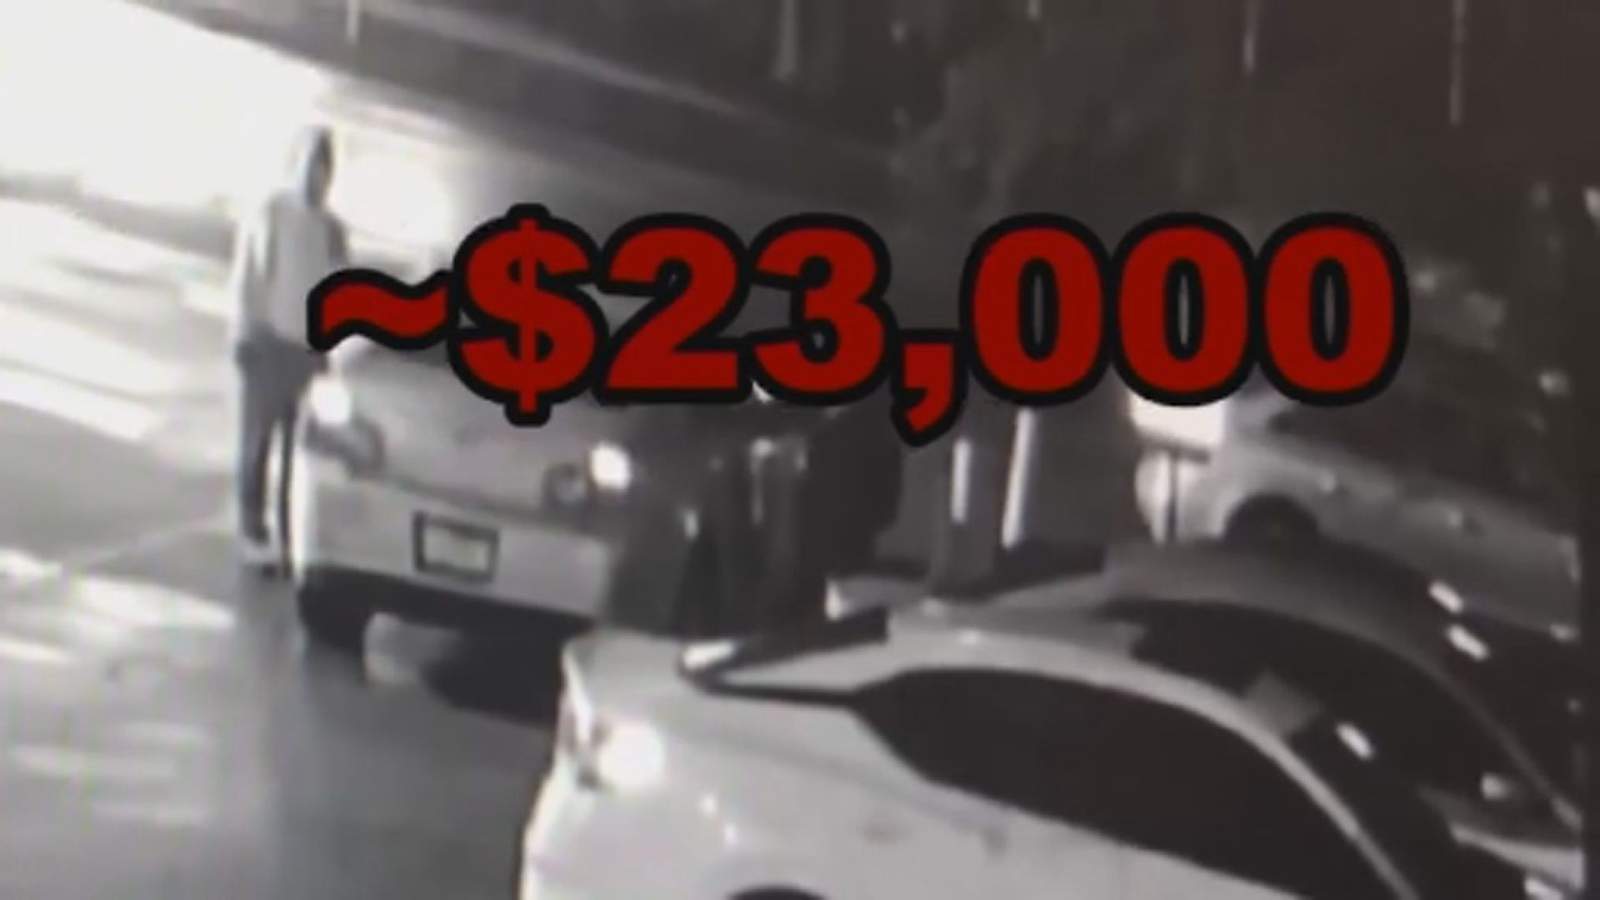 Car thieves steal $23,000 worth of video equipment from two local videographers